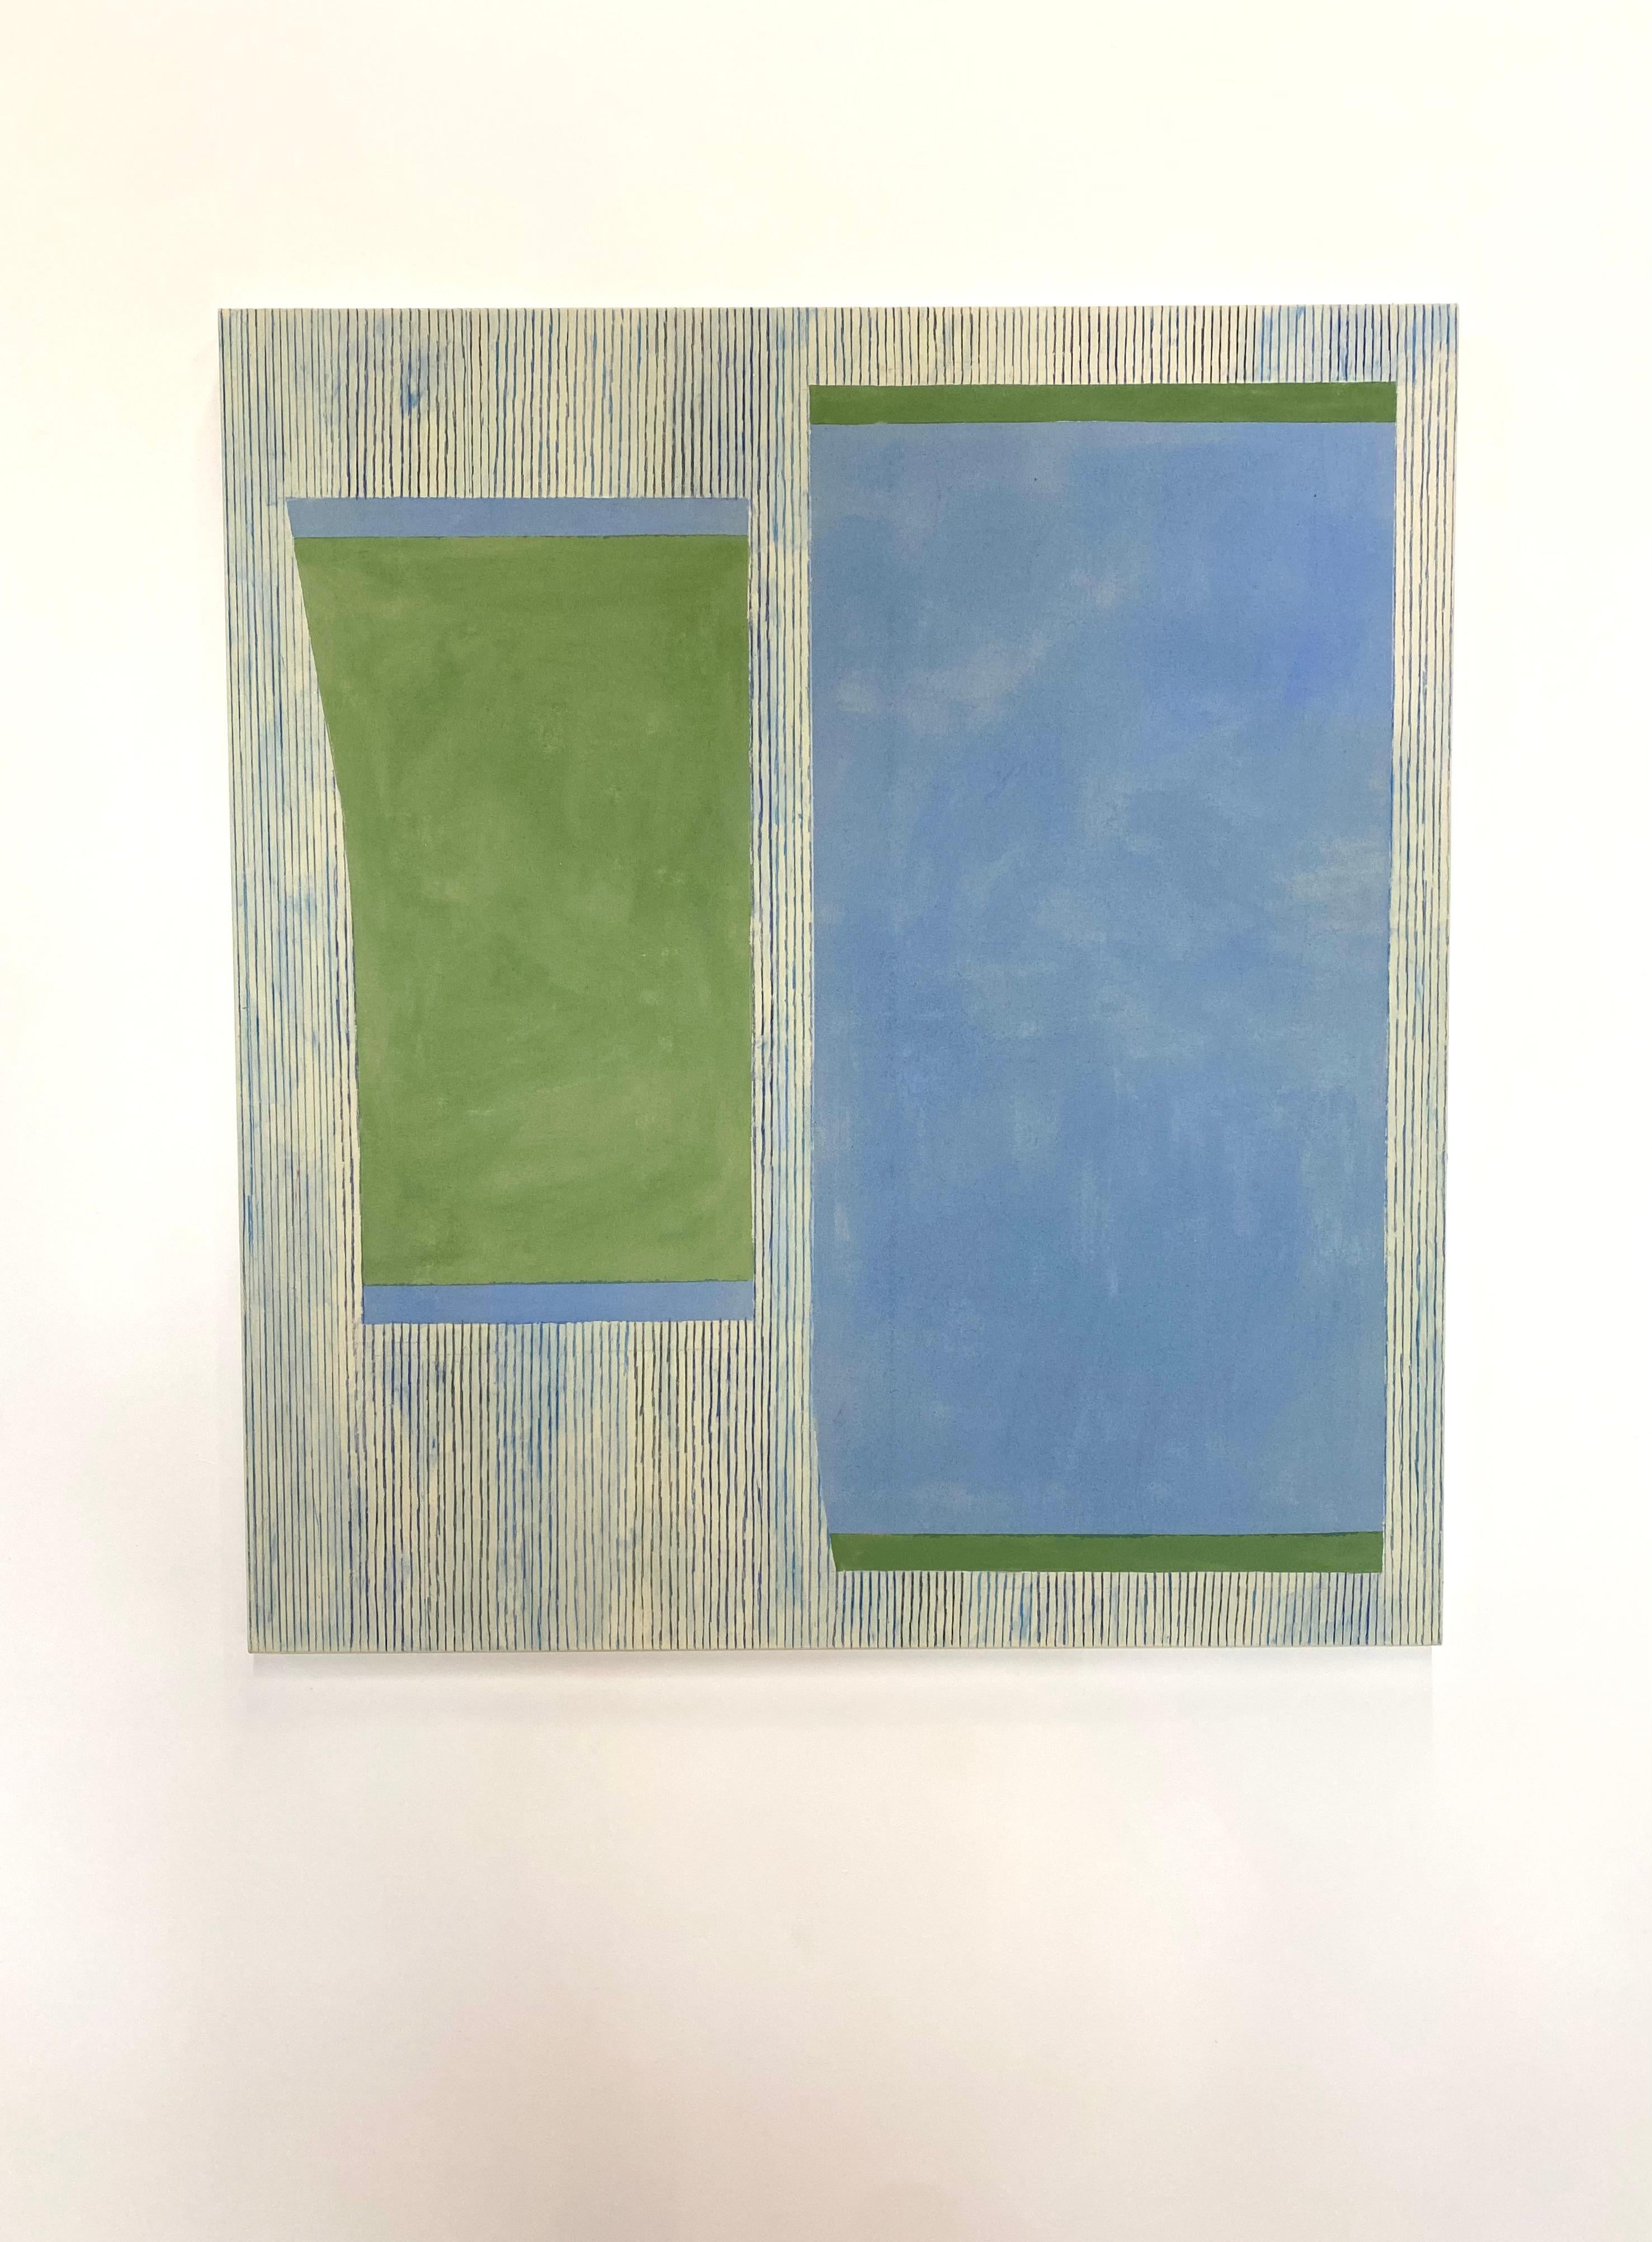 Bluecobalt Green, Light Blue, Grass Green, Stripes, Geometric Abstract Painting For Sale 1